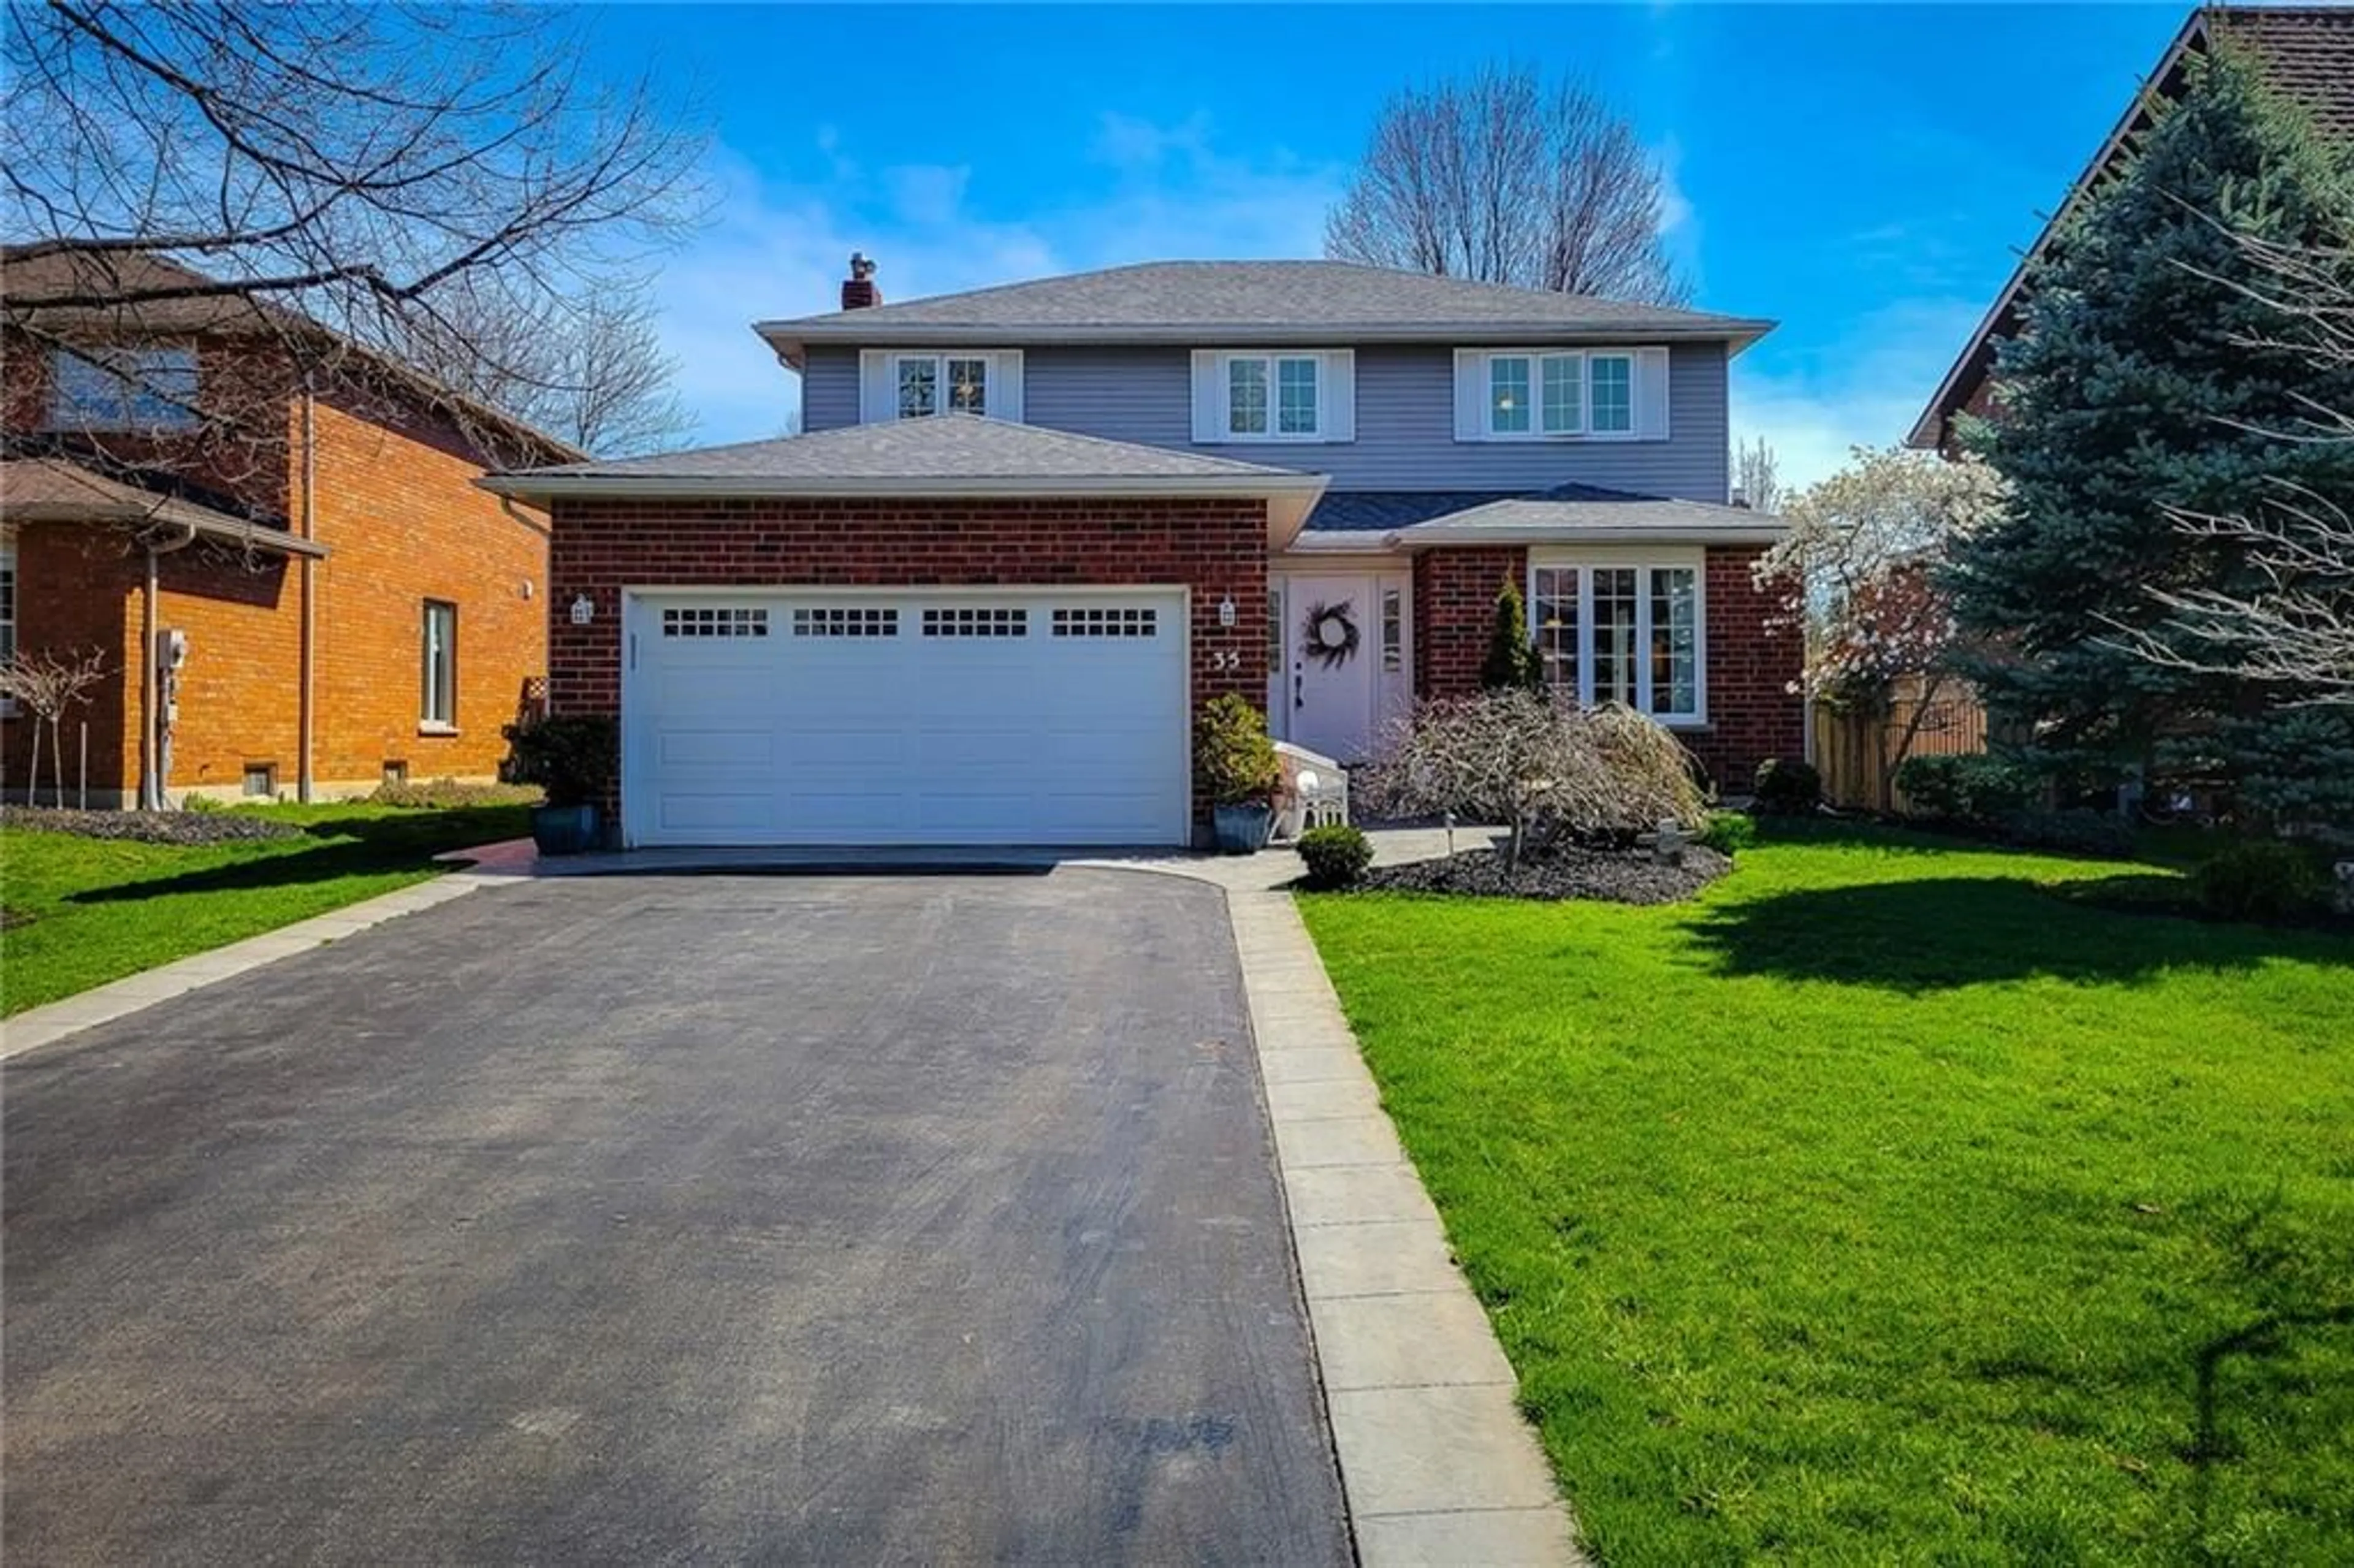 Home with brick exterior material for 35 GALLEY Rd, Ancaster Ontario L9G 4T1